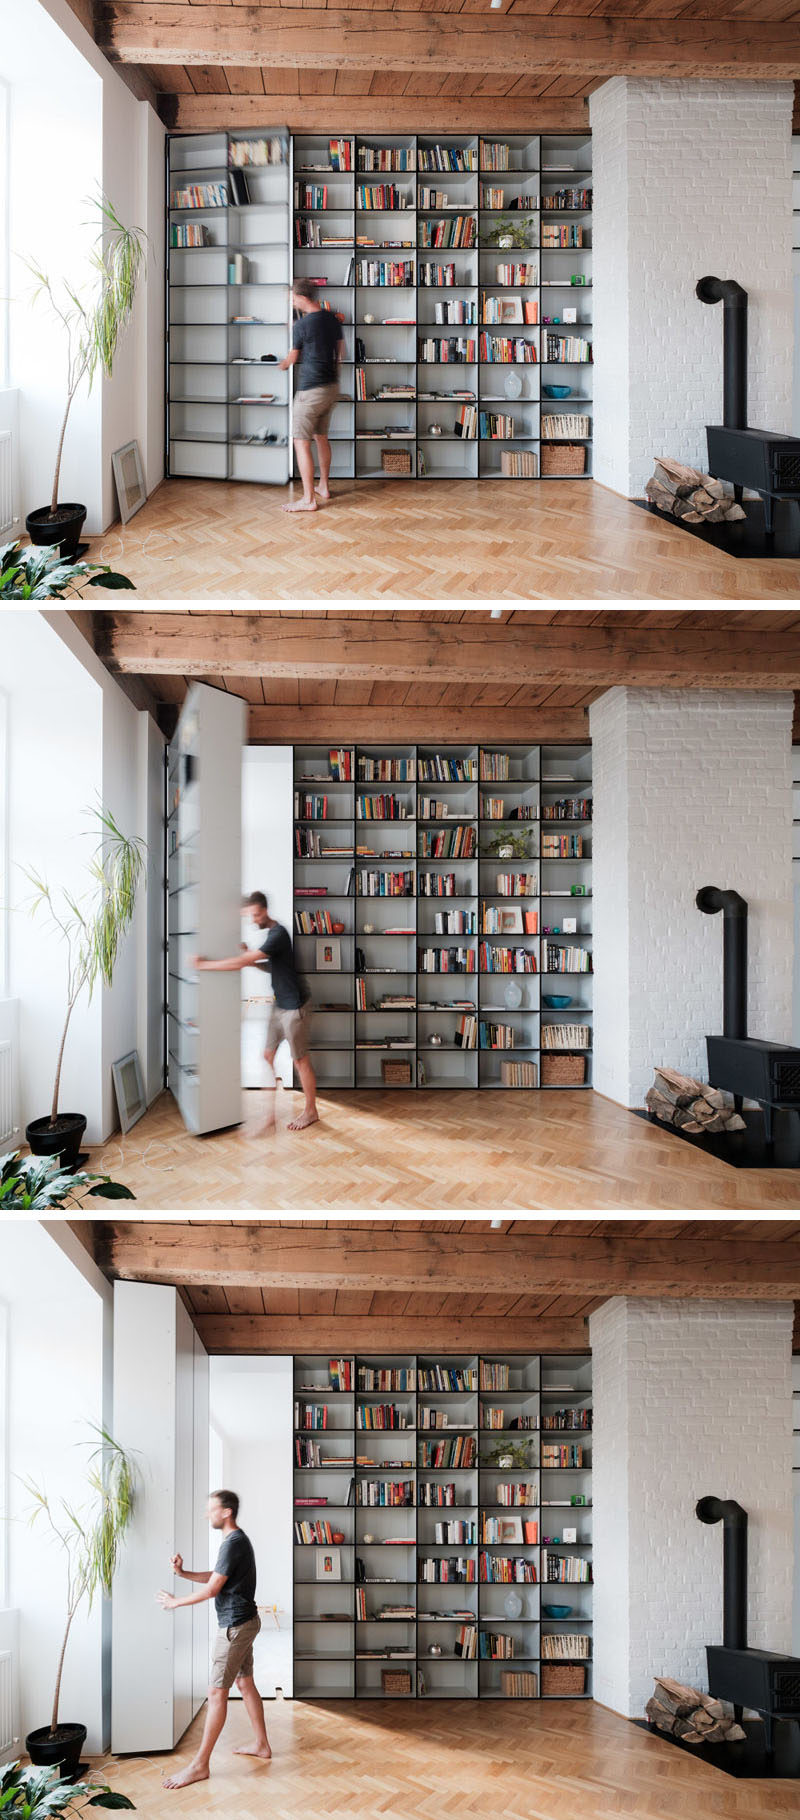 A bedroom hides behind this bookcase and is accessed through a secret door.